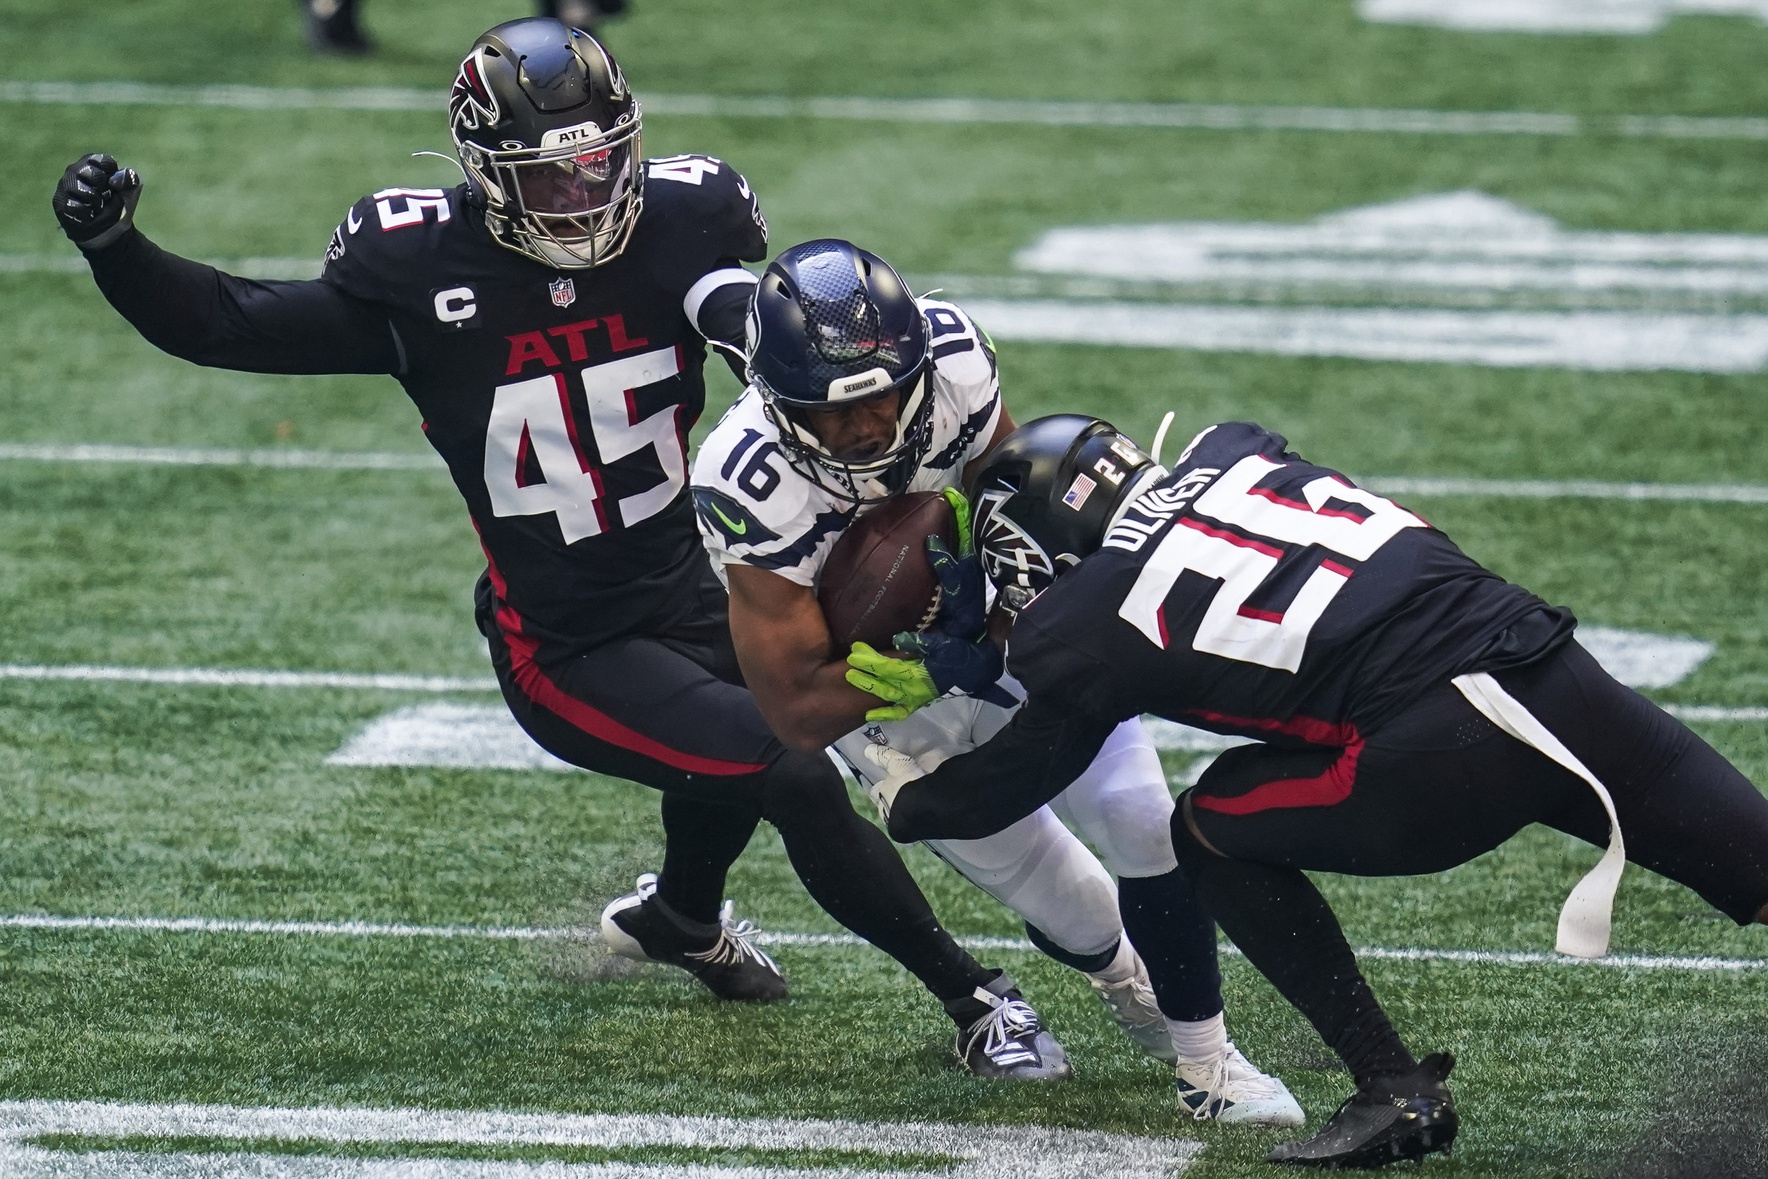 Falcons vs. Seahawks Week 3 preview and prediction